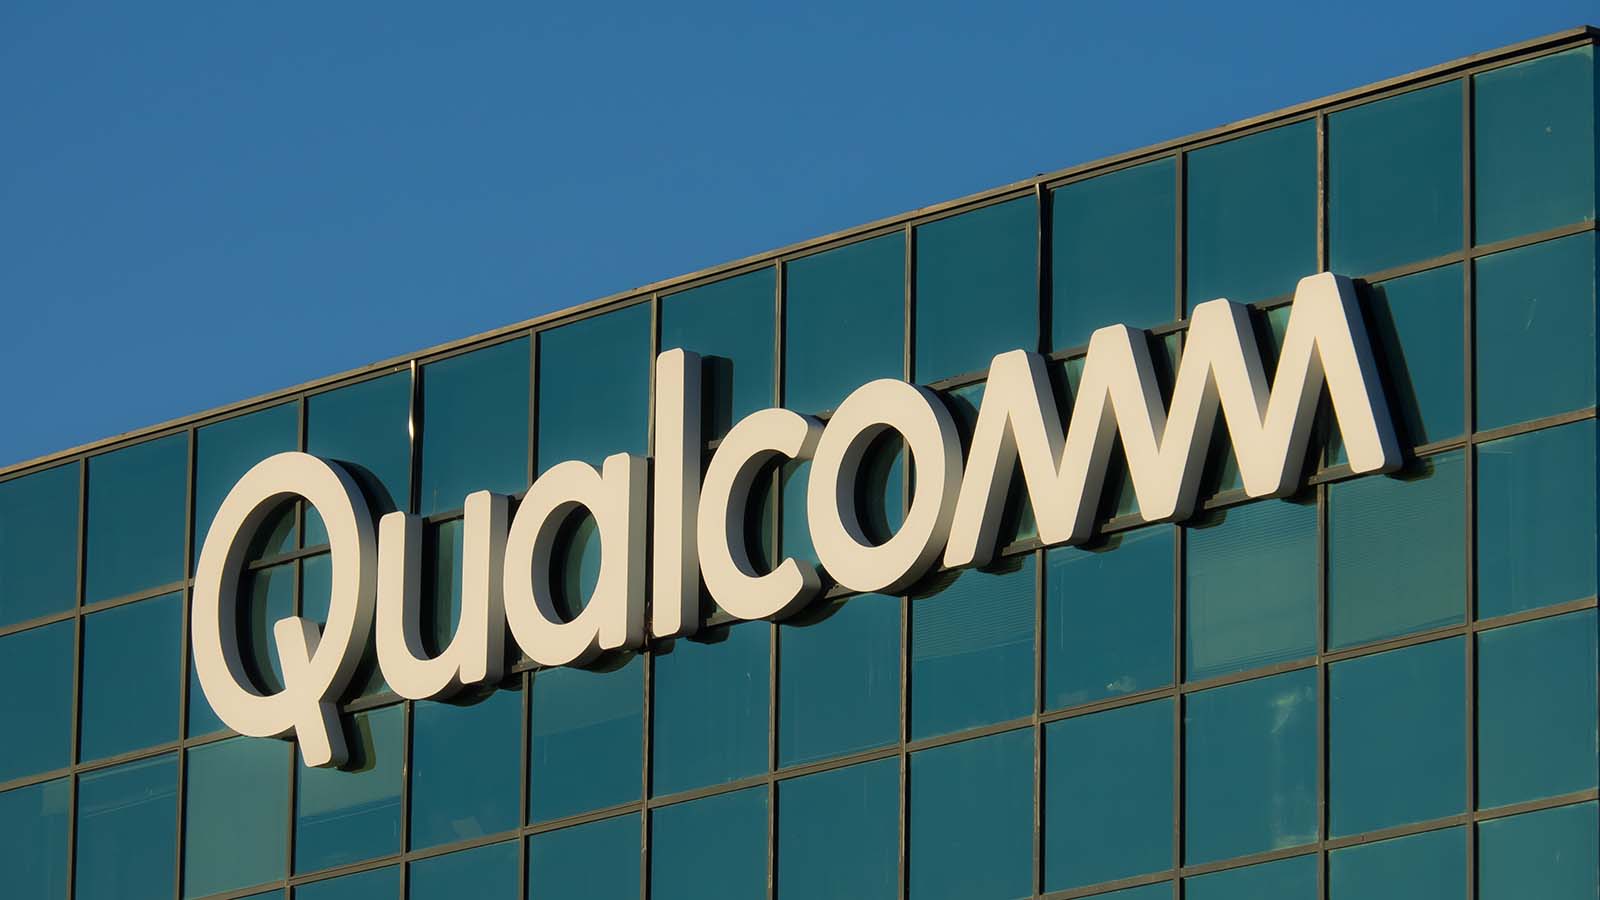 Qualcomm Stock Analysis: Take Your Profits and Wait for Lower Prices